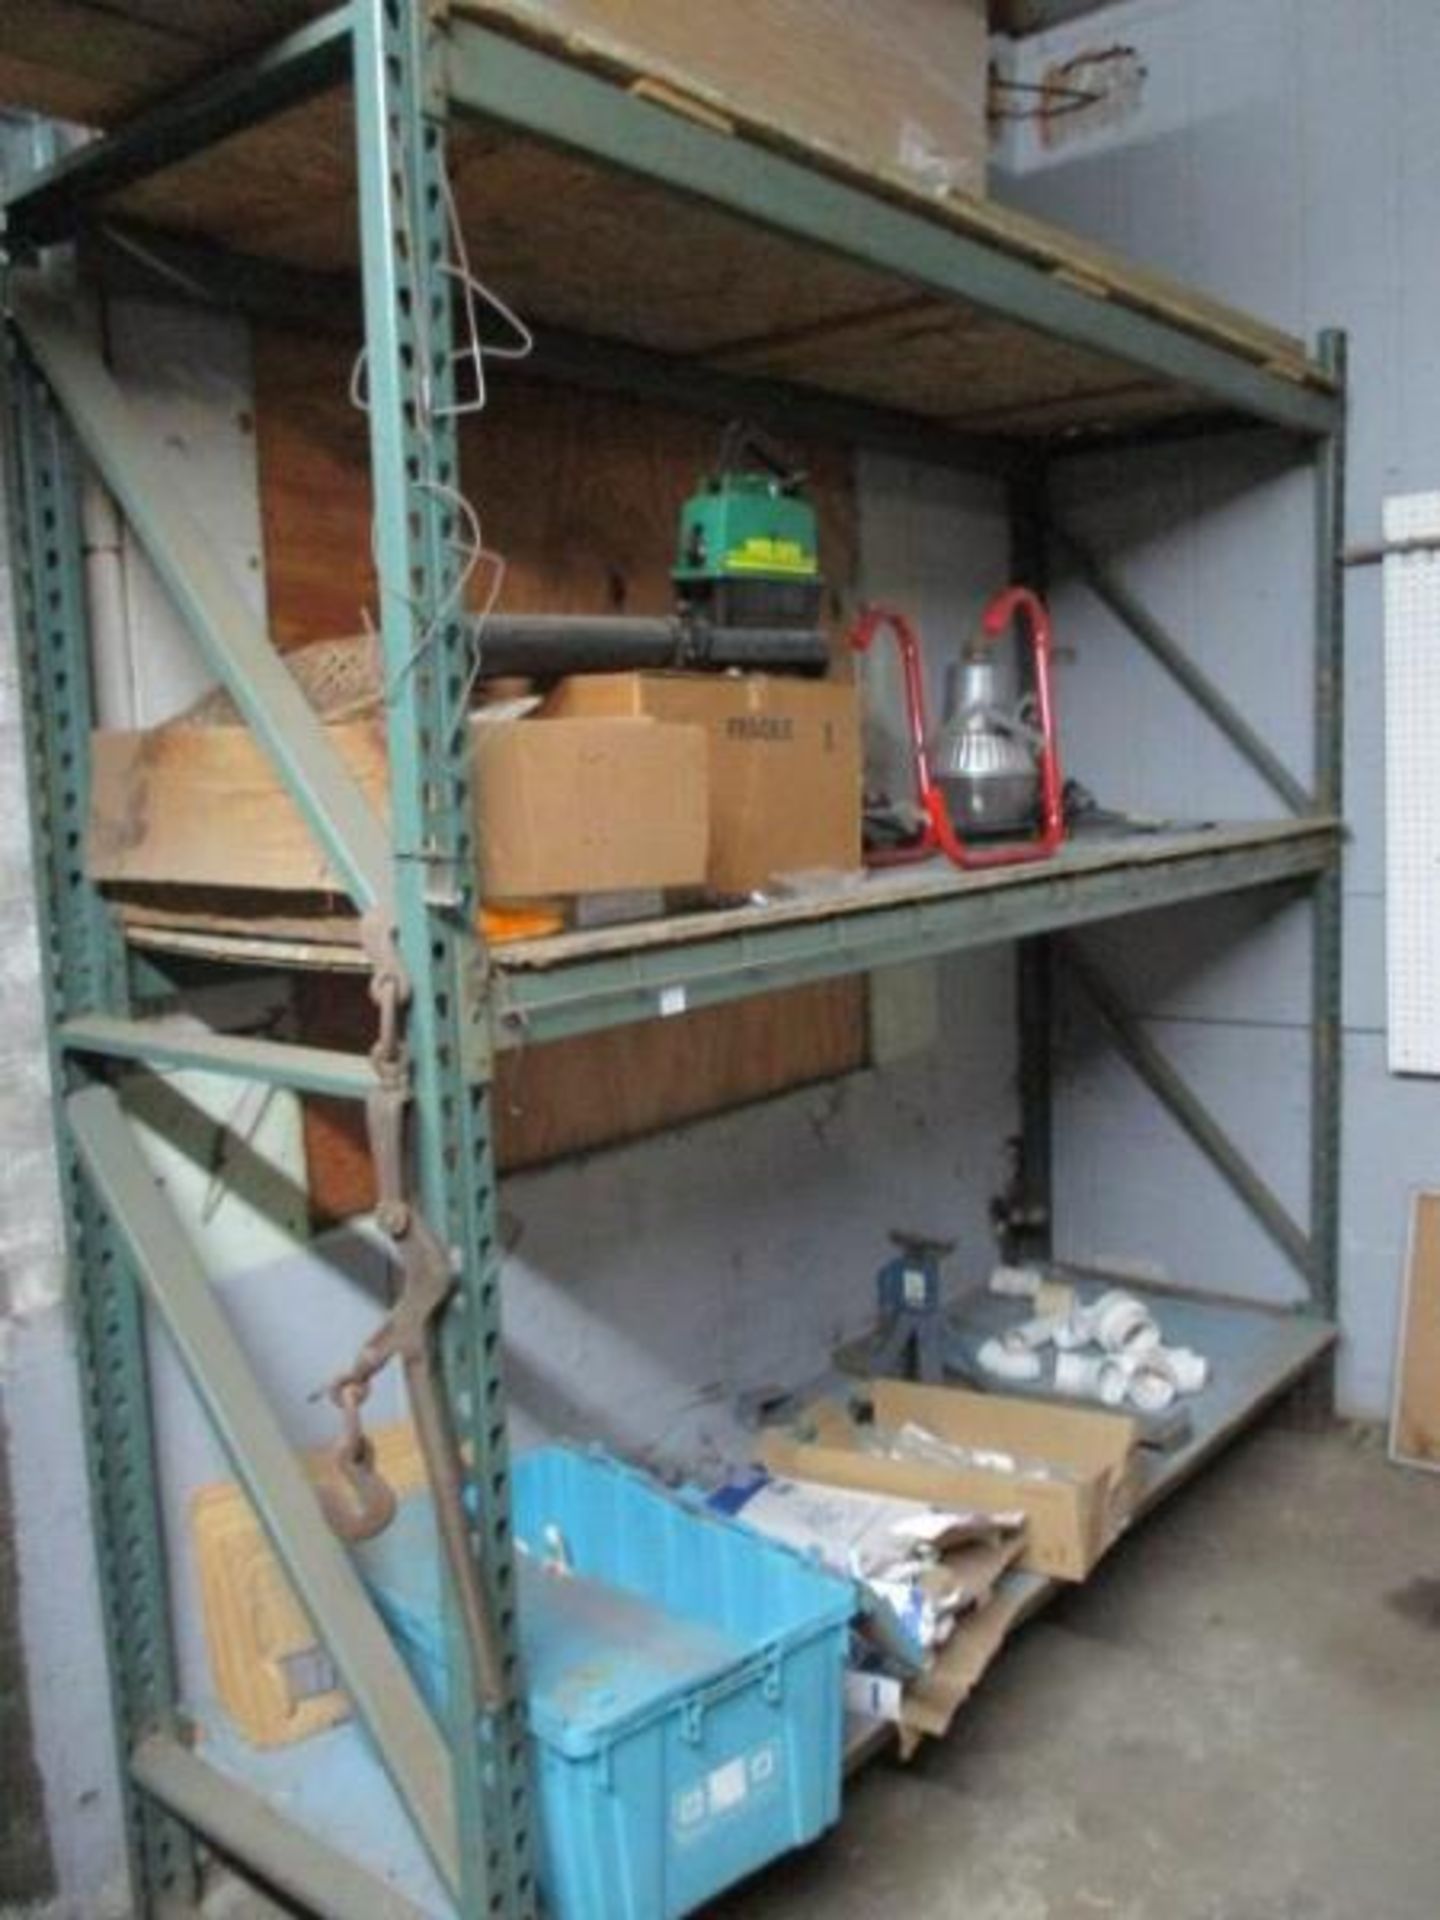 8 Ft Pallet Rack With Contents (Weedeater Blower/Vac, (2) Bemis Toulet Seat, Jack Stand, Misc